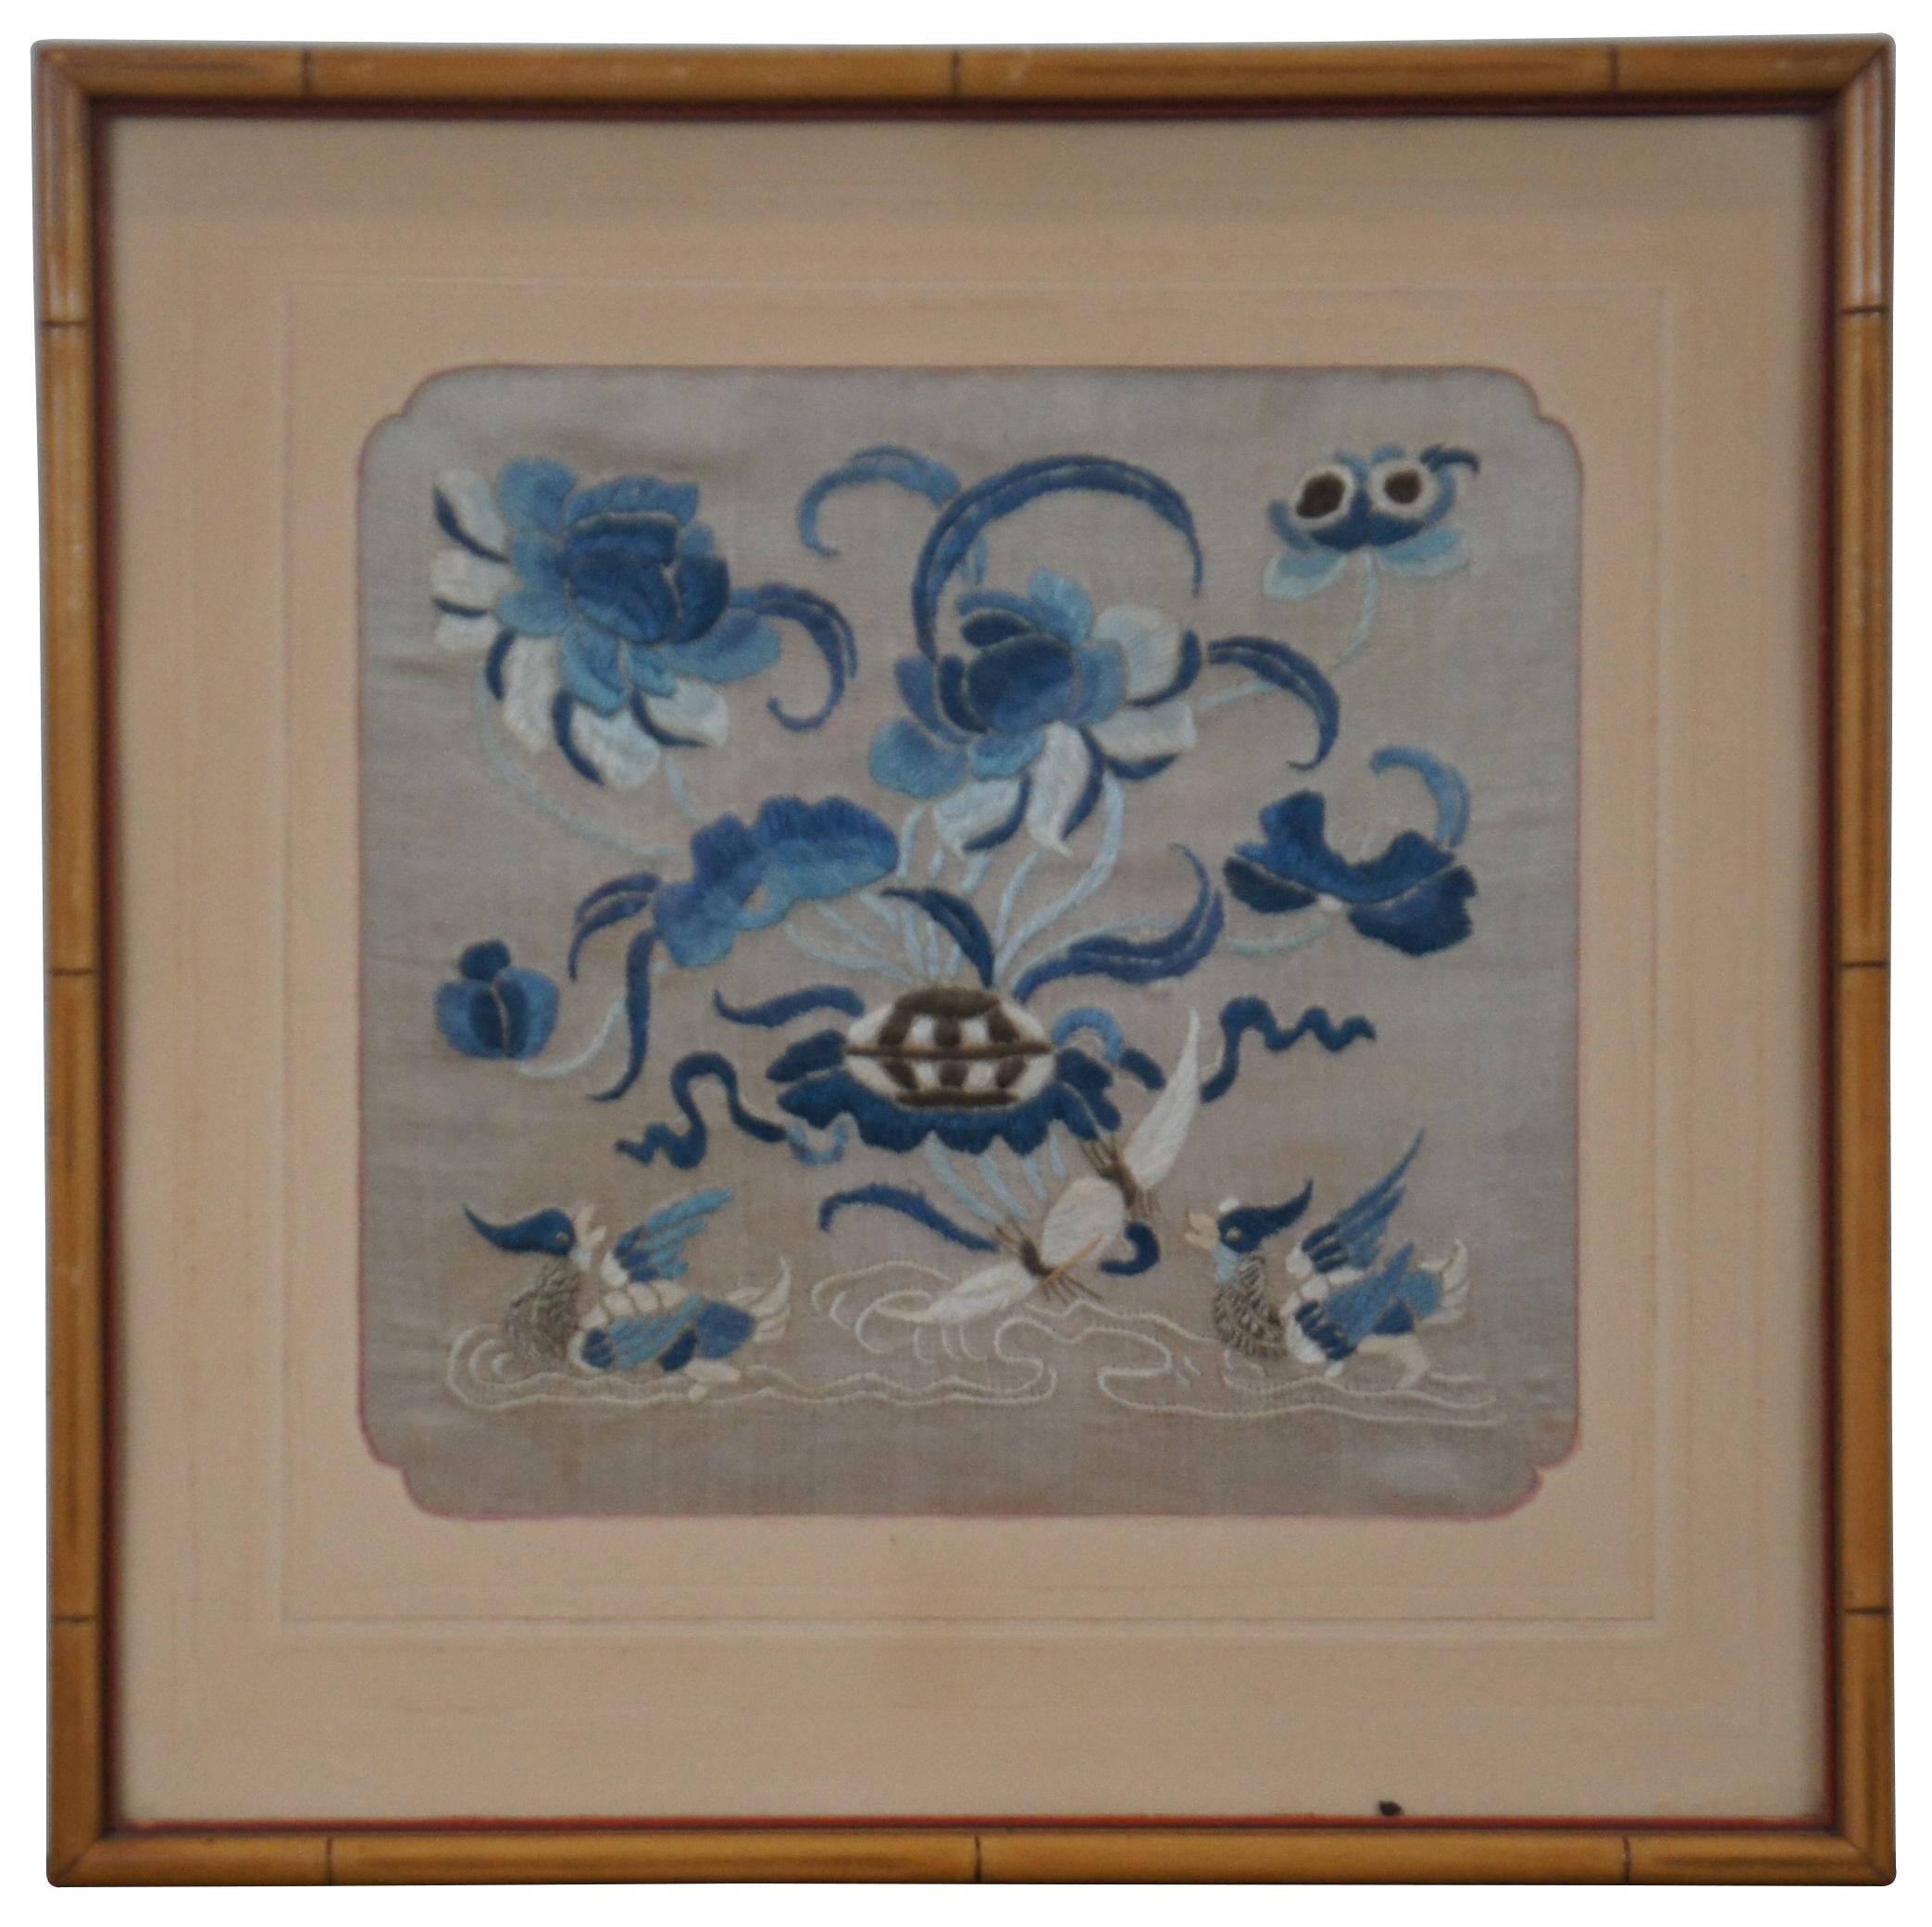 Pair of antique Chinese Qing Dynasty silk textile / tapestry court rank military buzi badges or panels embroidered with a scene Mandarin Ducks and blue flowers. Framed in faux bamboo.

A mandarin square, also known as a rank badge, was a large